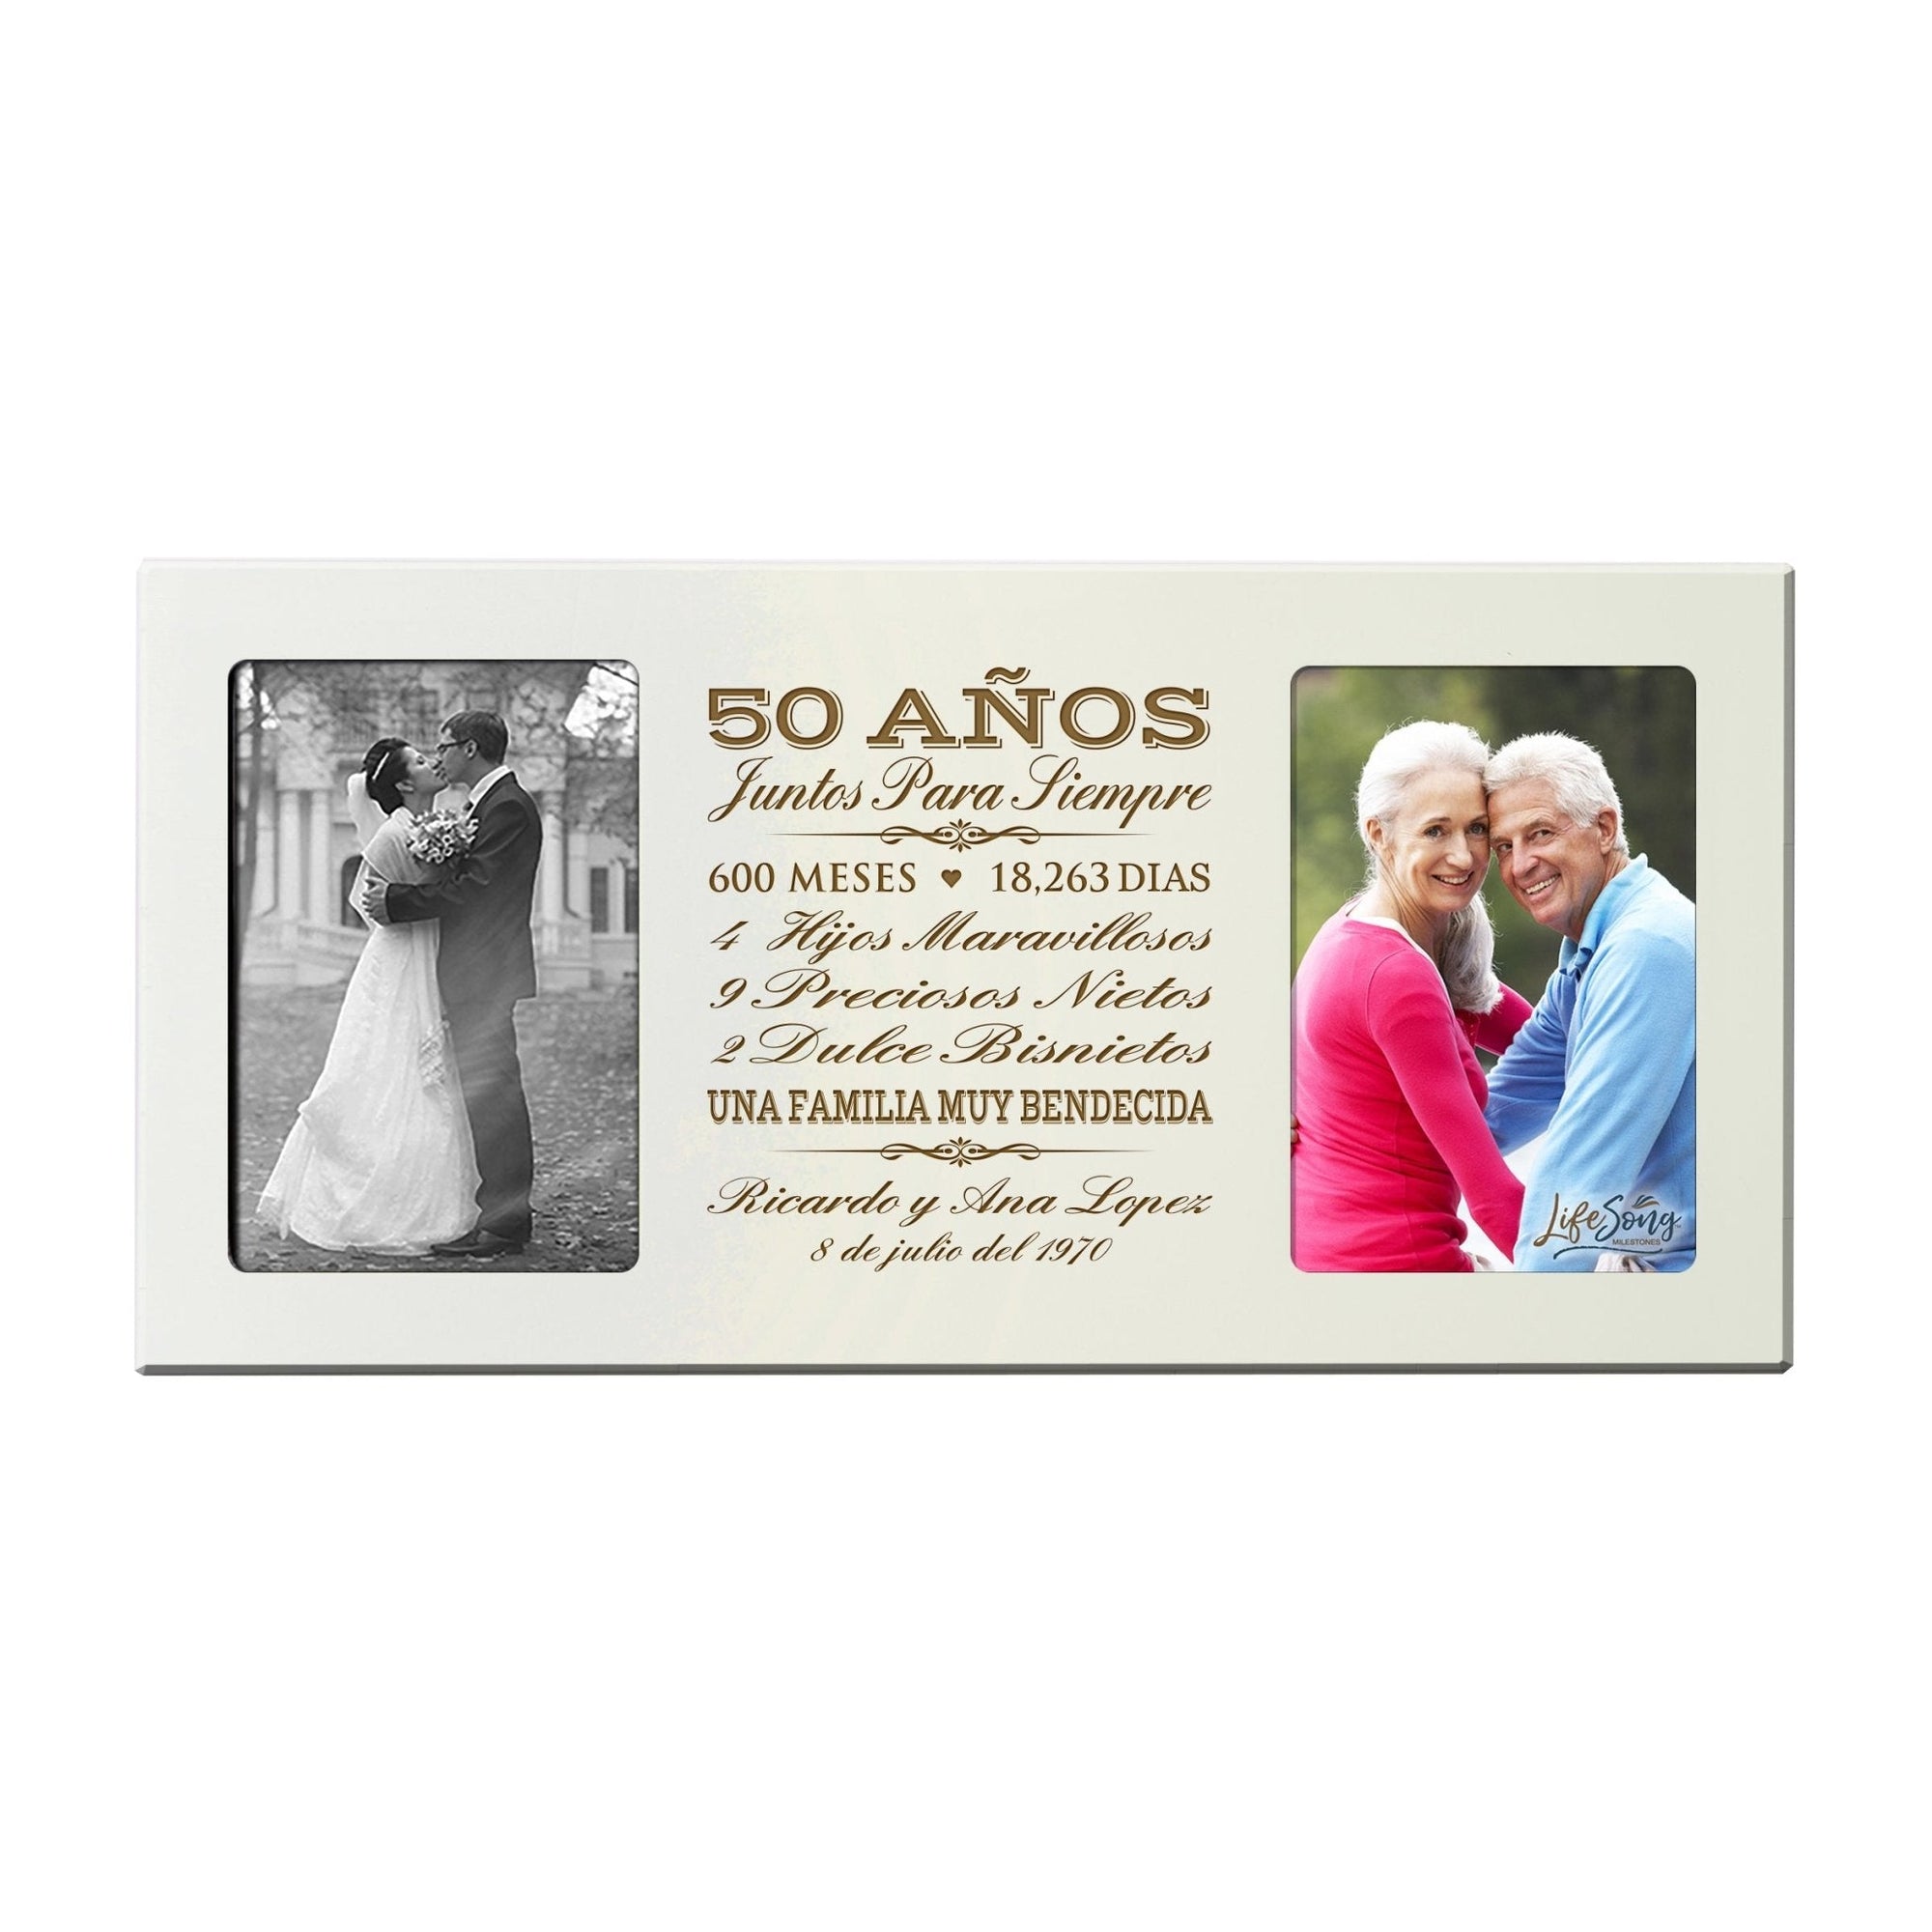 Lifesong Milestones Personalized Couples 50th Wedding Anniversary Spanish Picture Frame